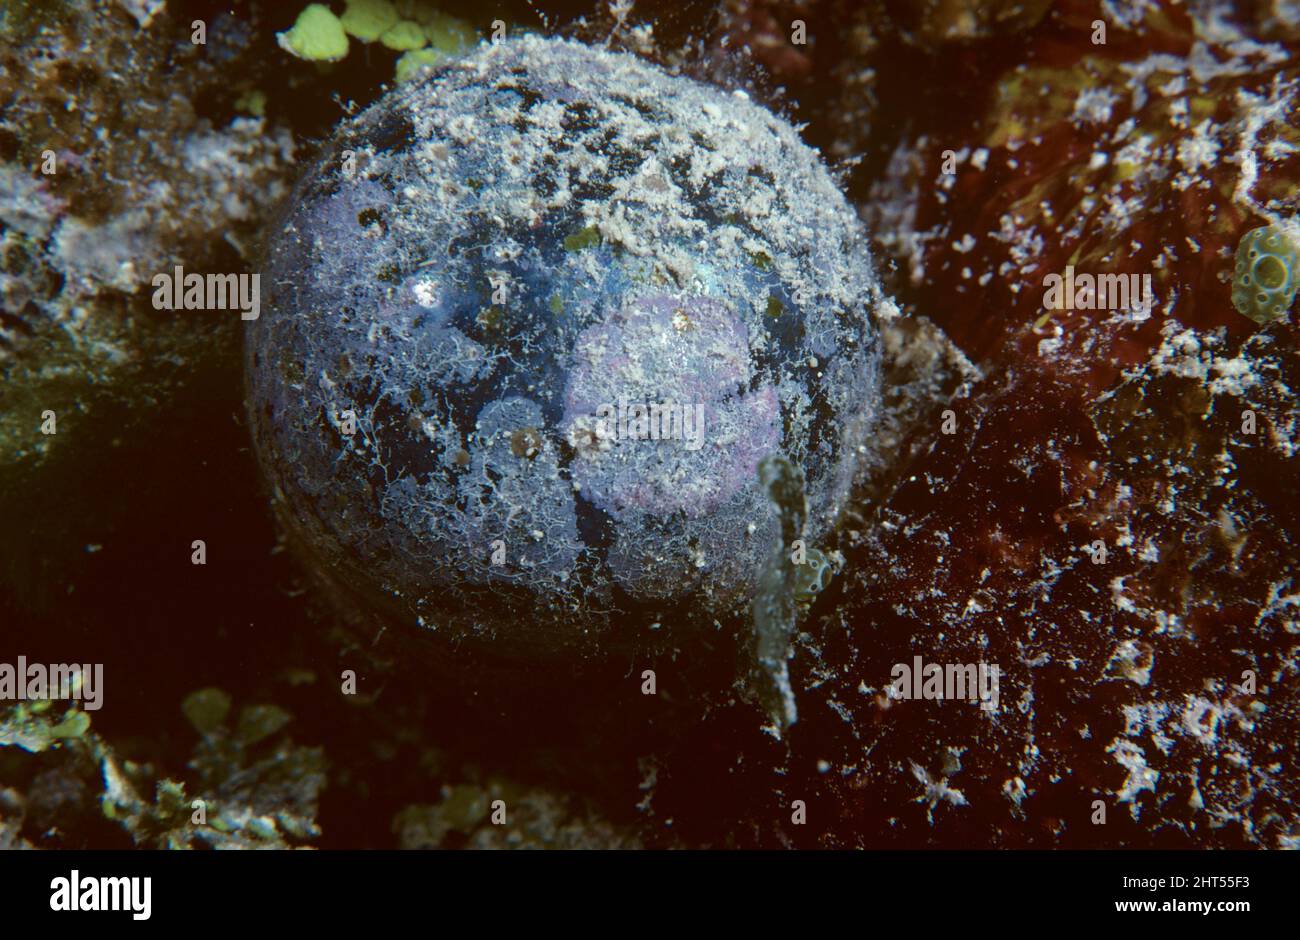 Sailor's eyeballs (Valonia ventricosa), a single-celled green algae, one of the largest, between 1 and 5 cm in diameter. Stock Photo